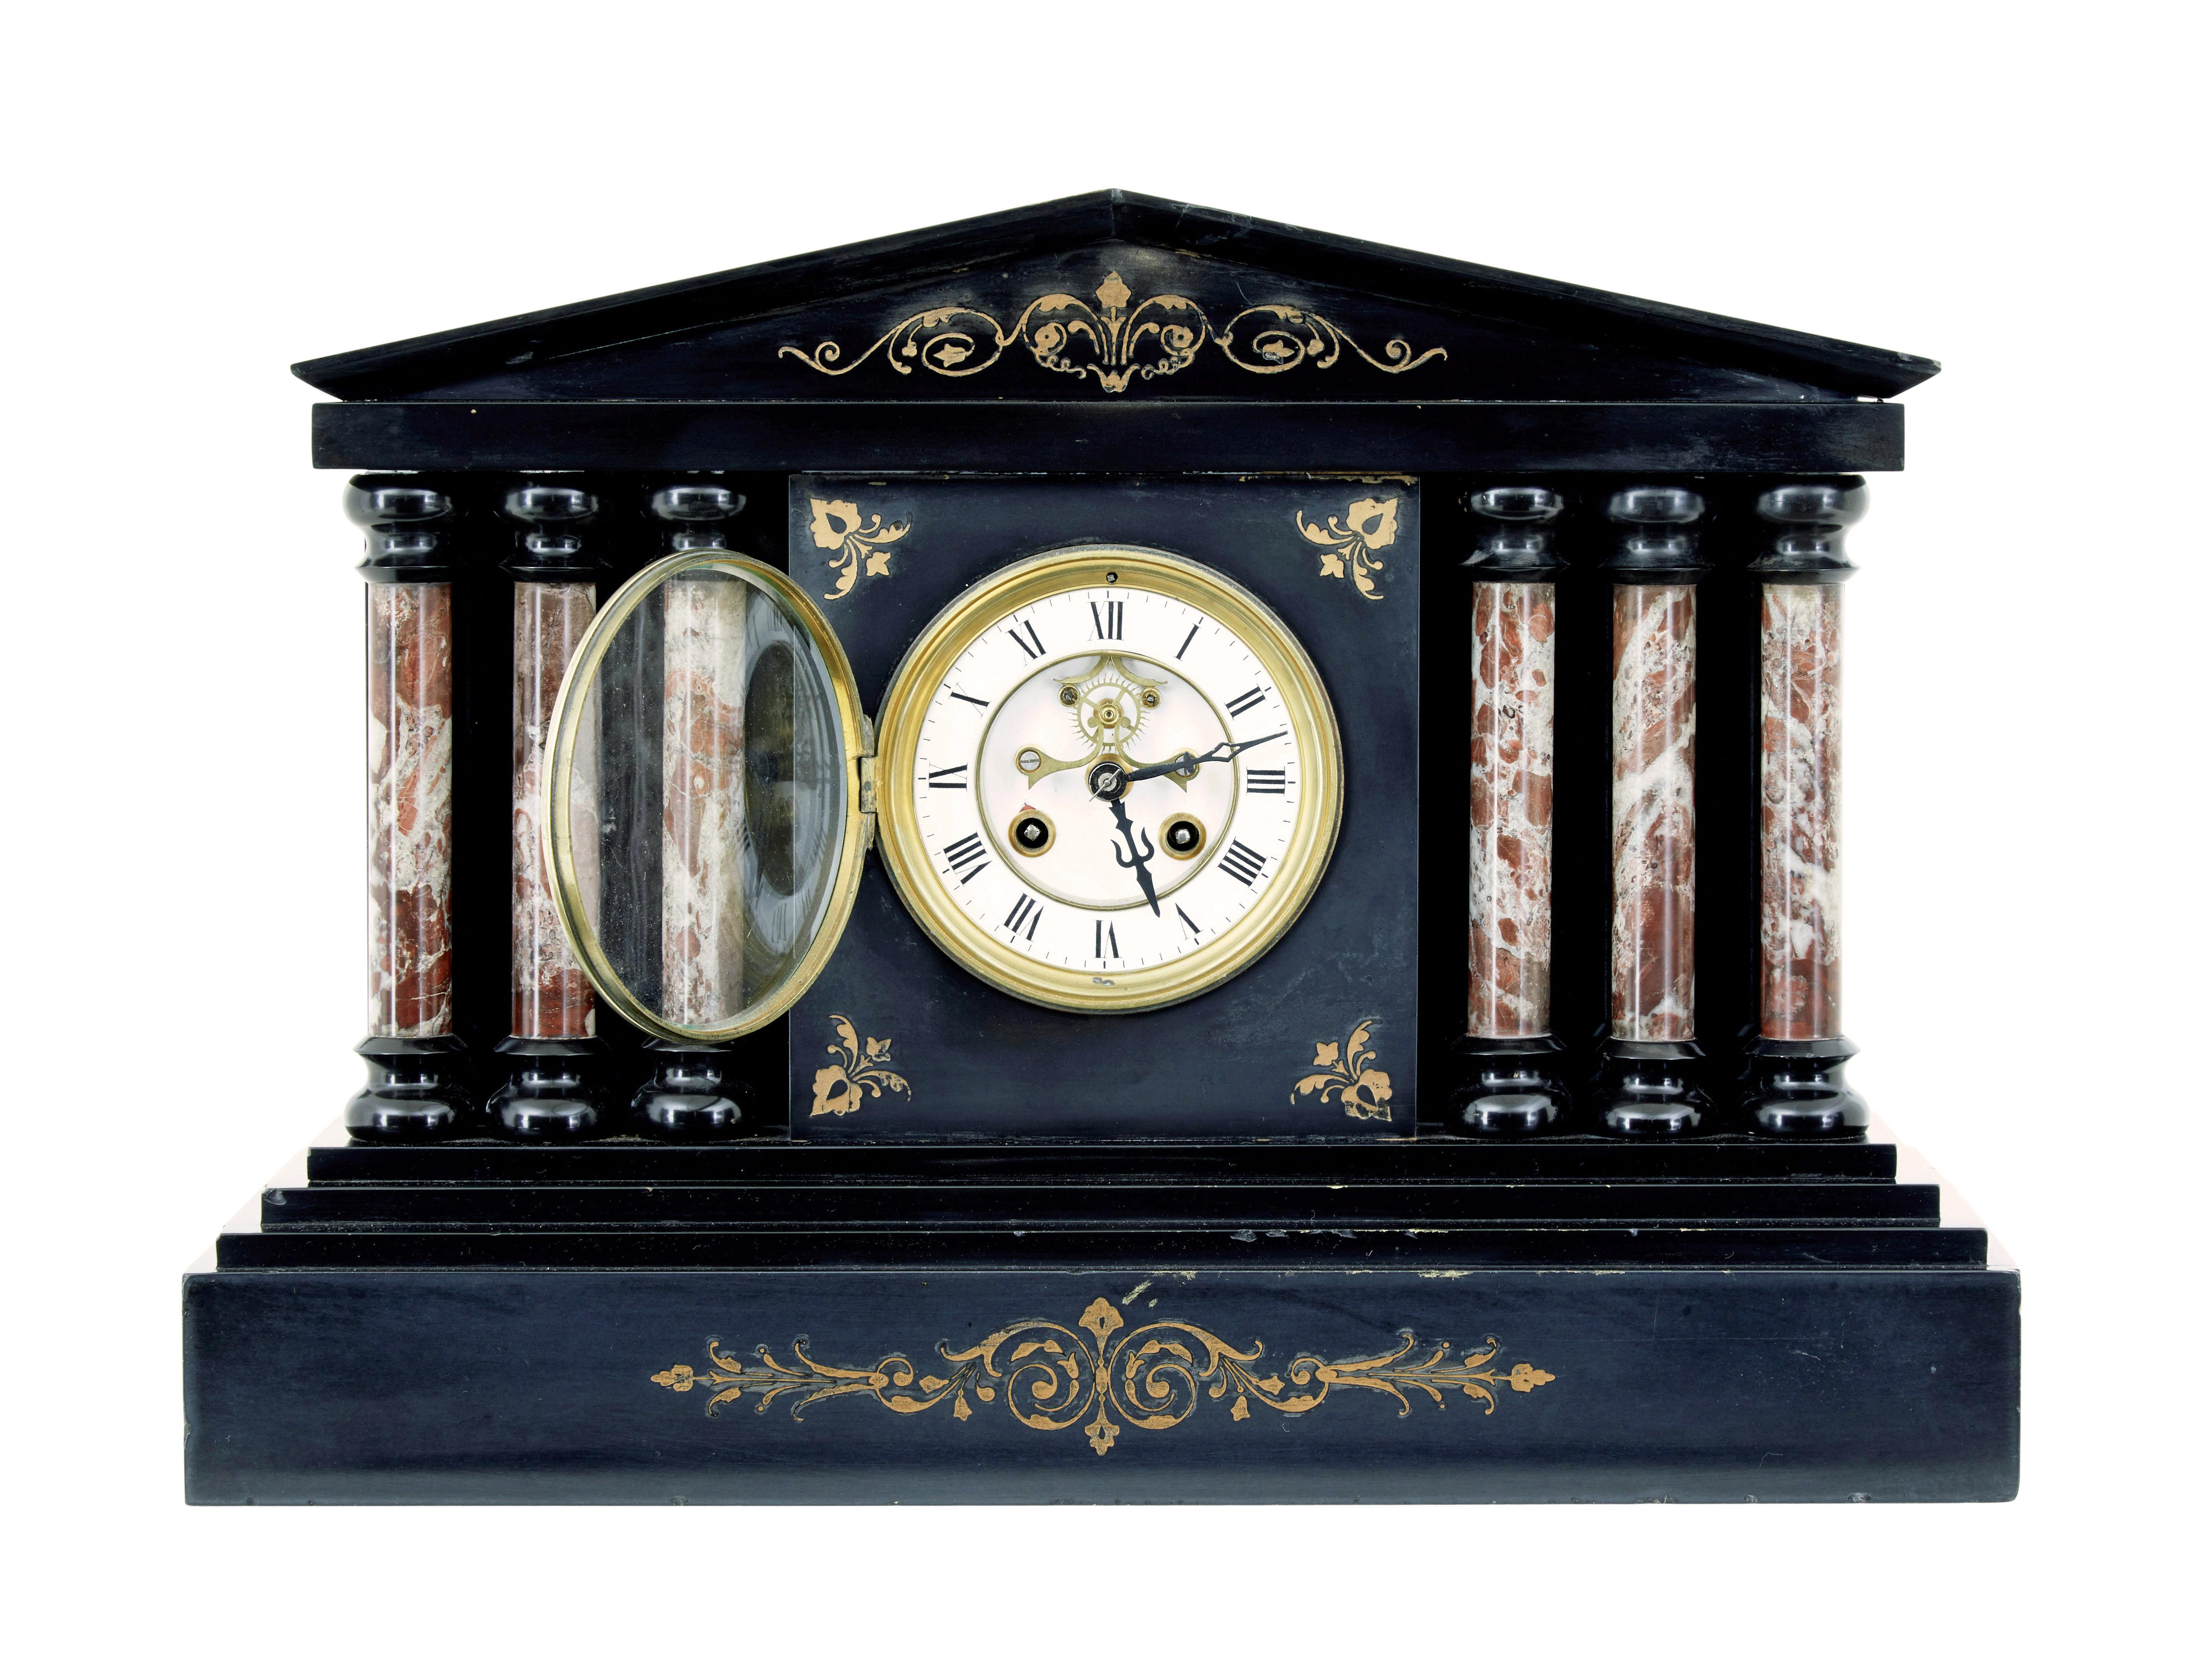 19th century victorian black marble mantle clock circa 1890.

Victorian mourning clock made in black marble.  Pointed architectural pediment with gold leaf swag design below.  White enamel face with roman numerals.

Clock face is flanked either side